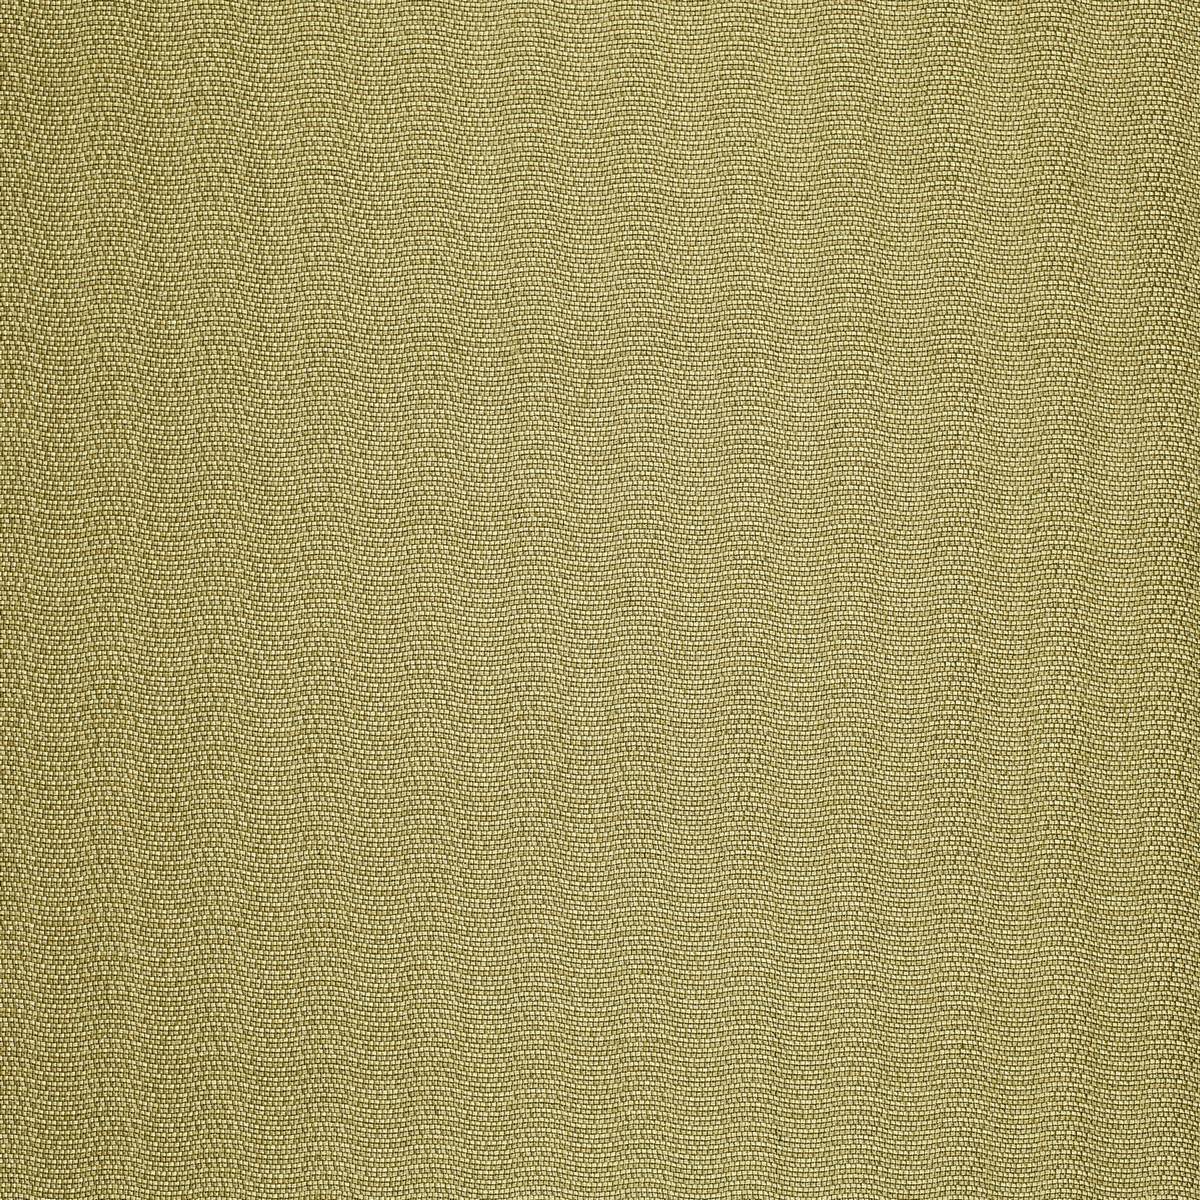 Metallica Old Gold Fabric by Zoffany